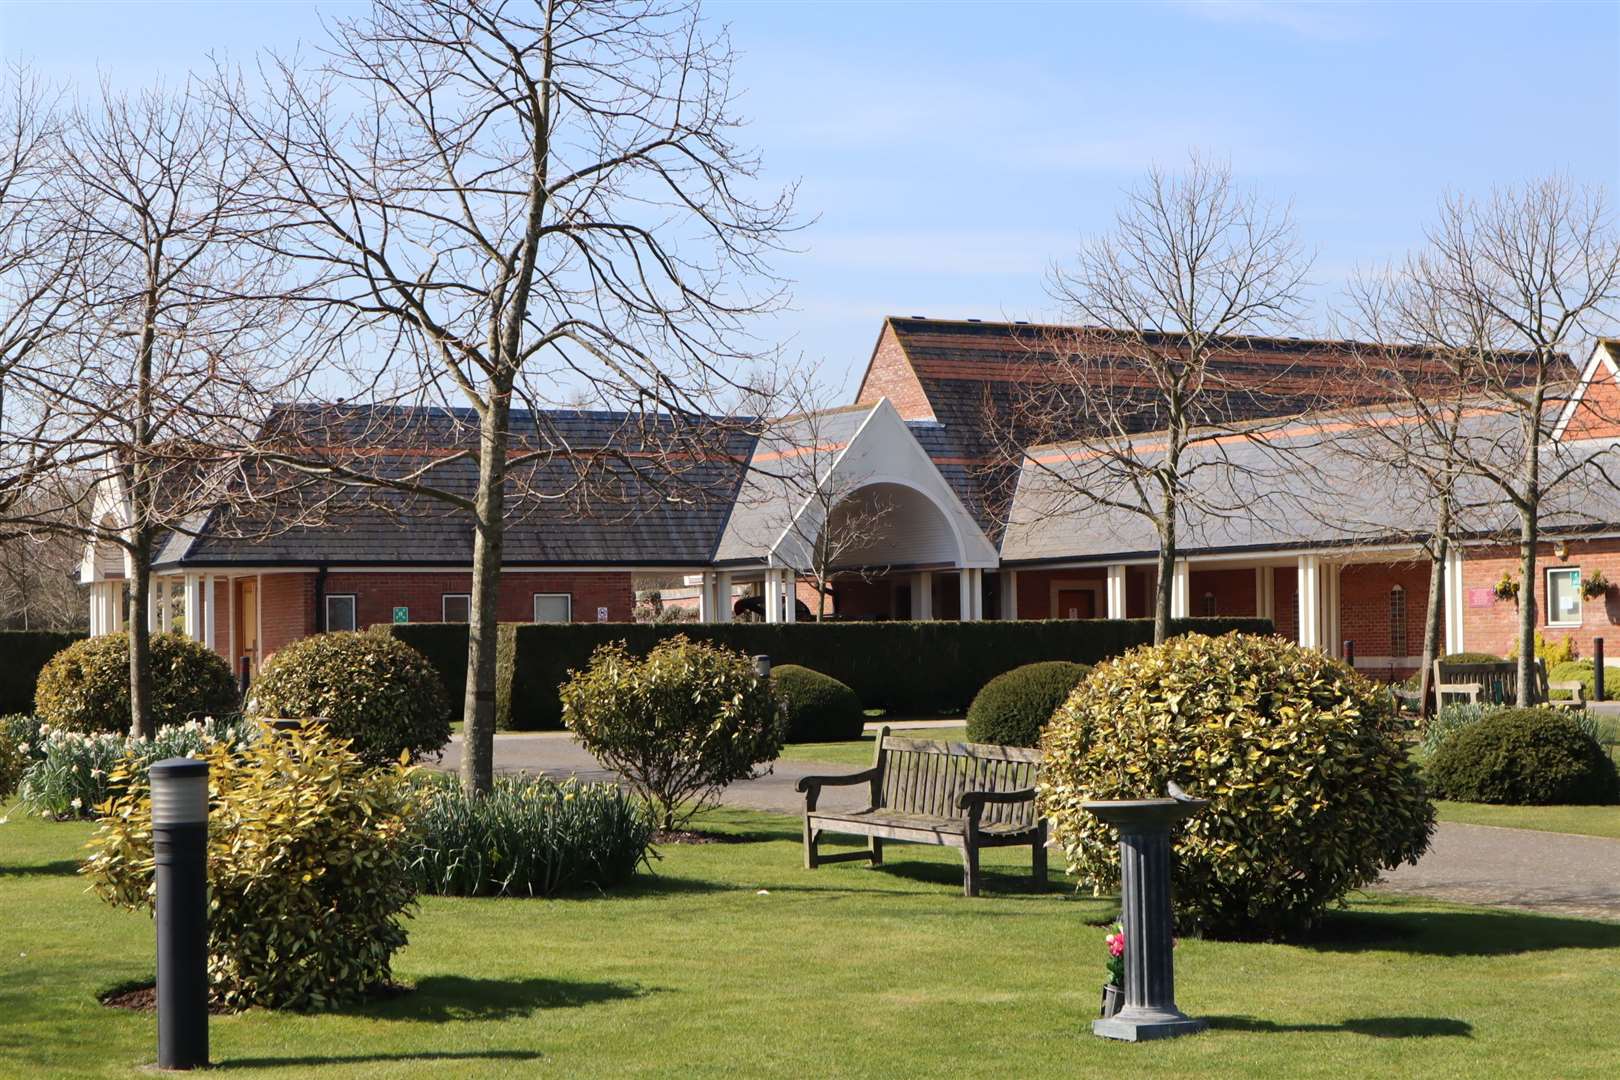 The Garden of England Crematorium in Bobbing has been put up for sale